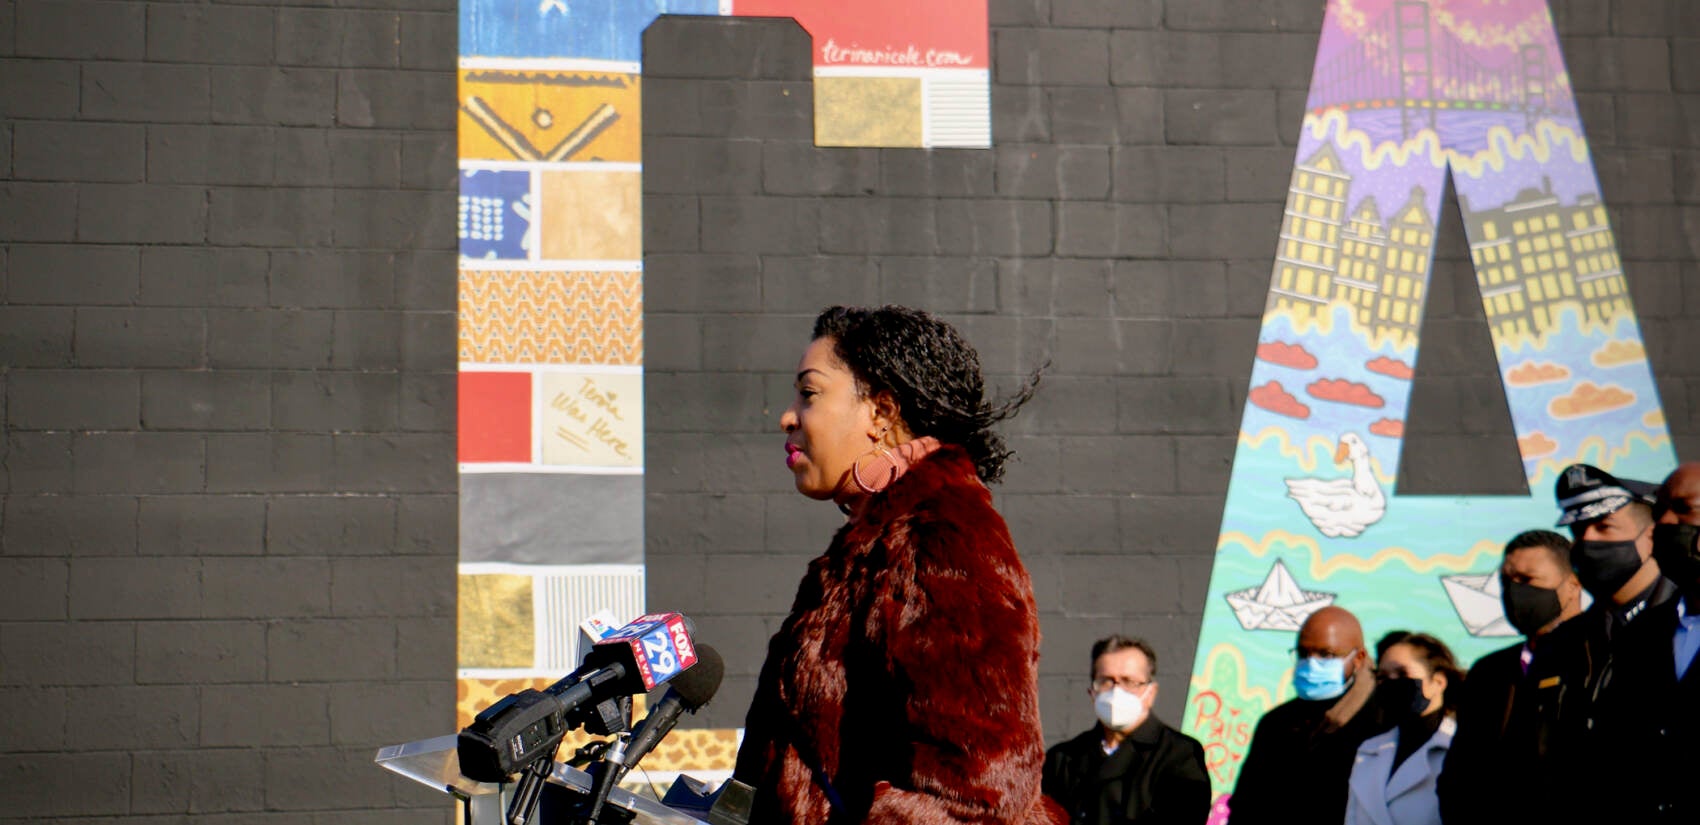 Fabric and fashion artist Terina Nicole Hill designed the letter C for the ''Camden Invincible'' mural. (Emma Lee/WHYY)